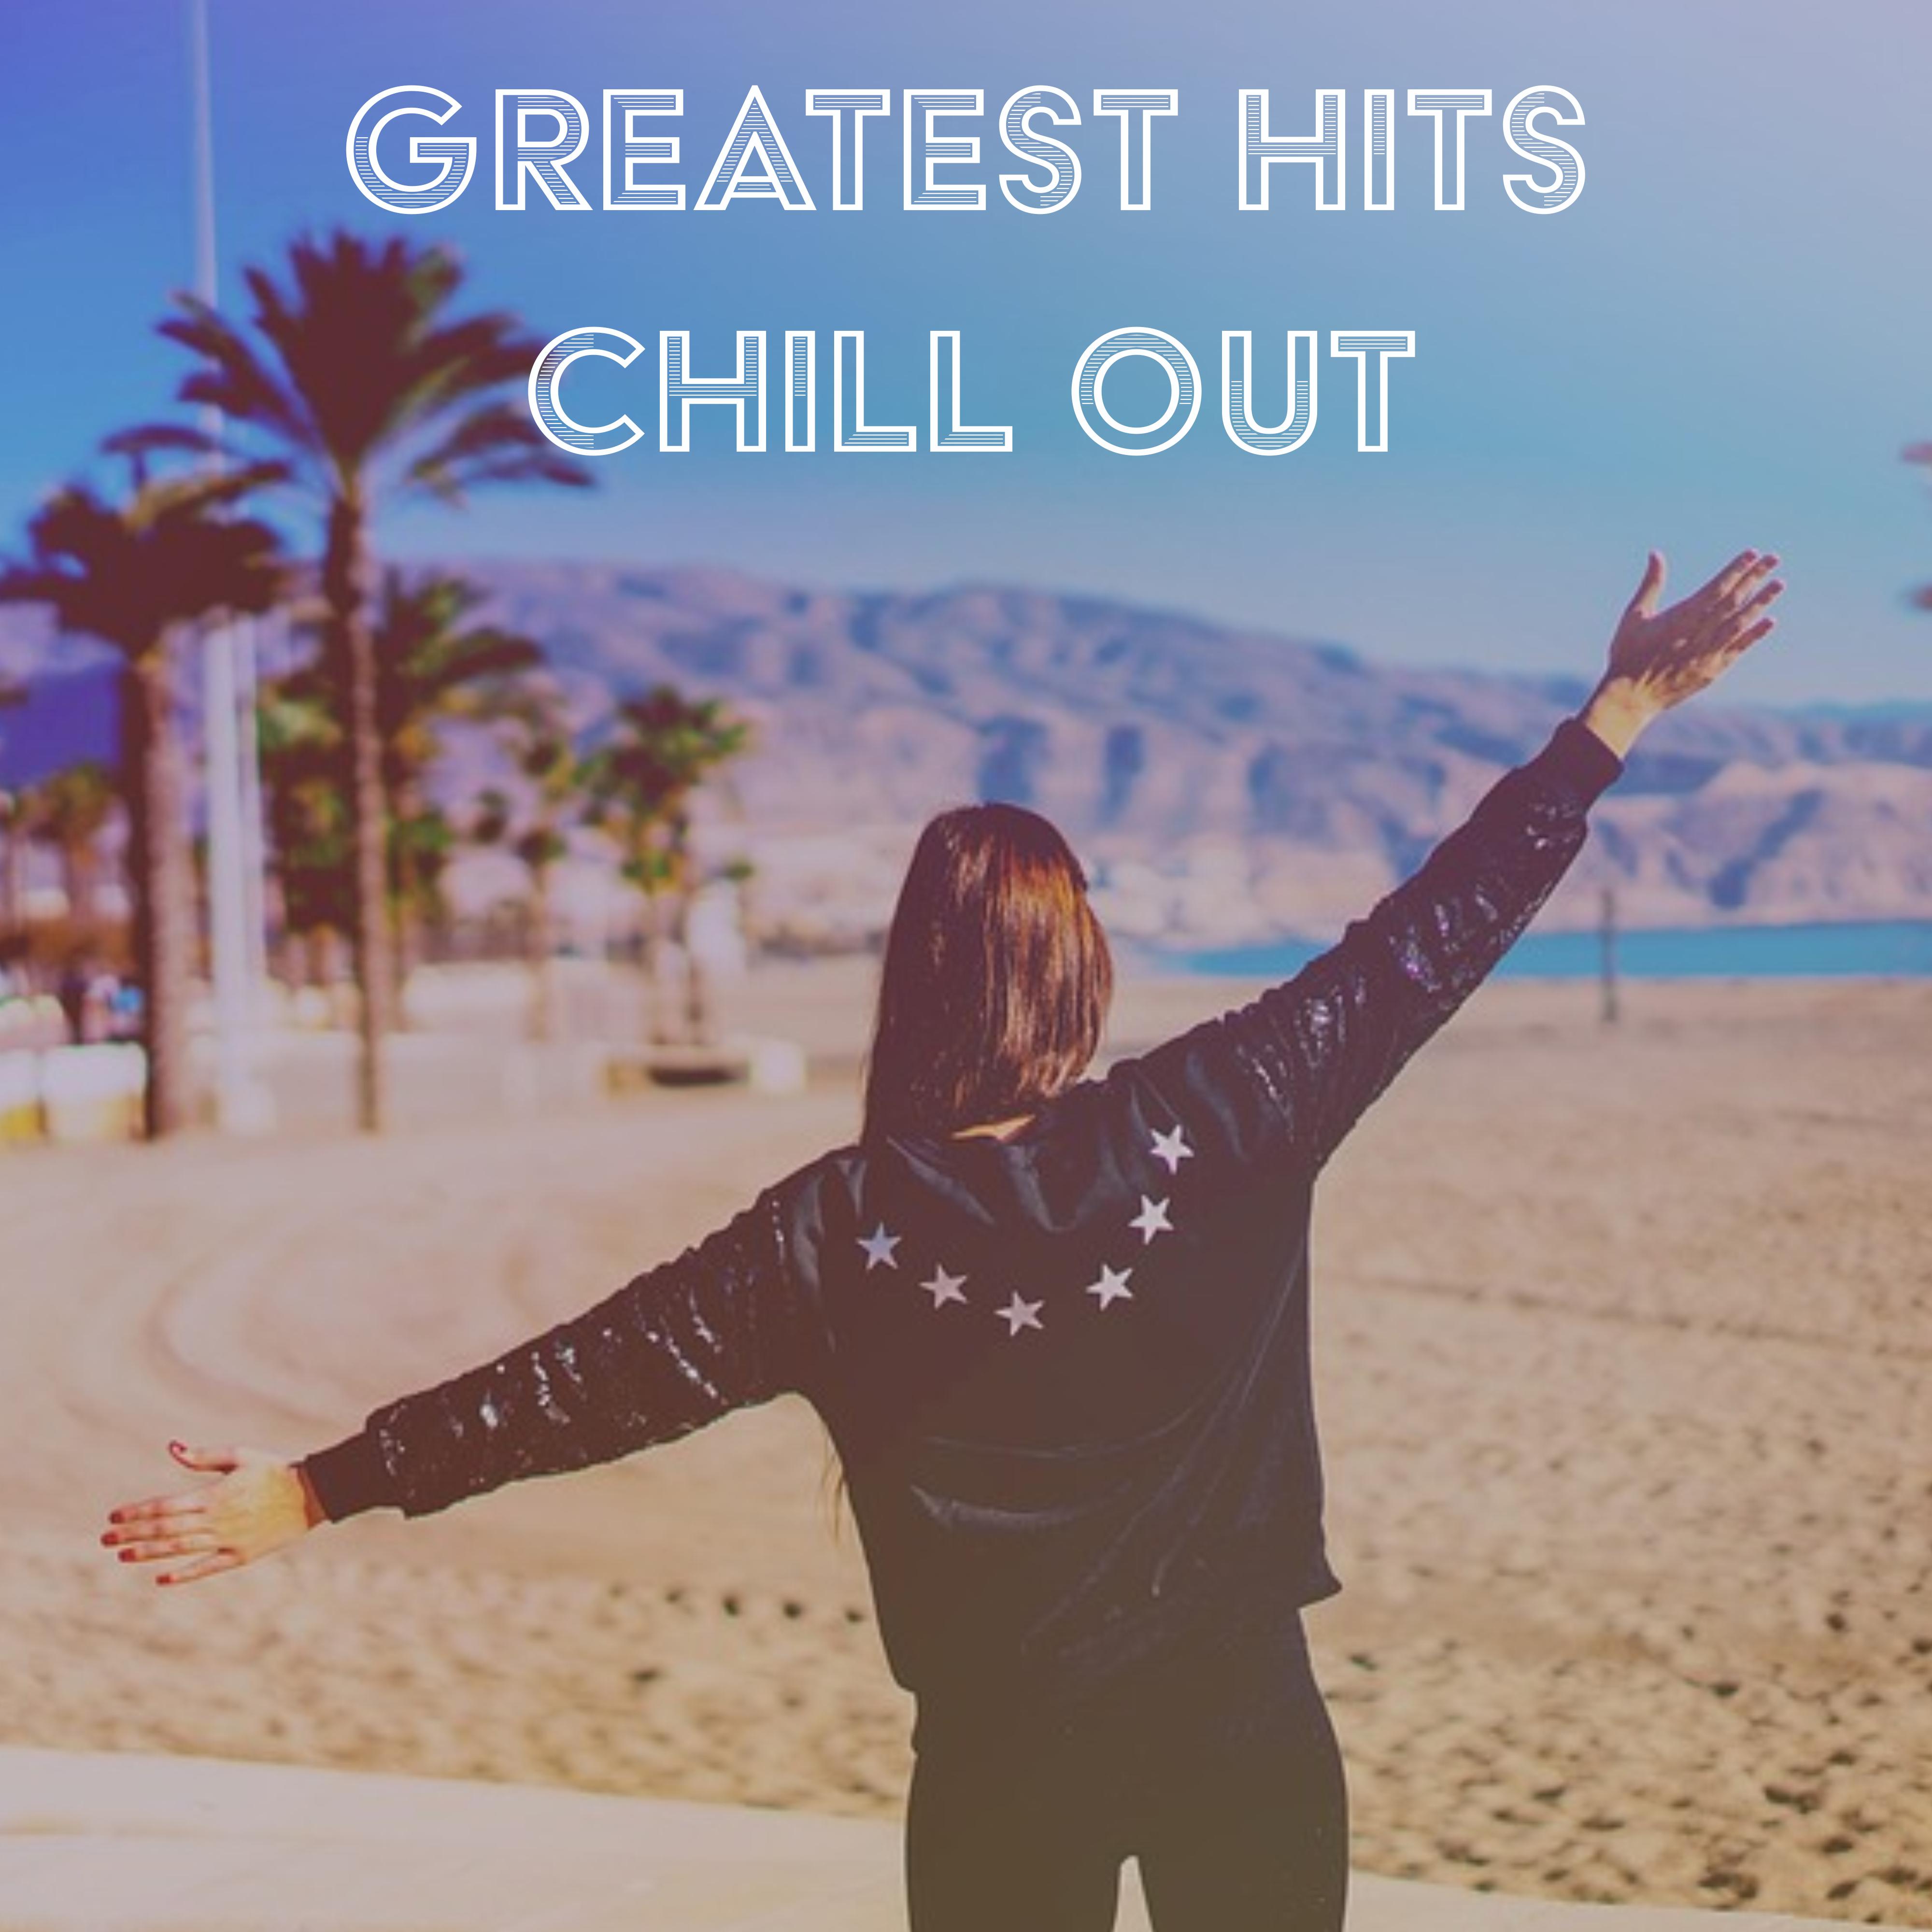 Greatest Hits Chill Out – Pure Chill Out Music, Electronic Lounge, Relax Ibiza Chill, Beach Music, Chill Out Summer Music